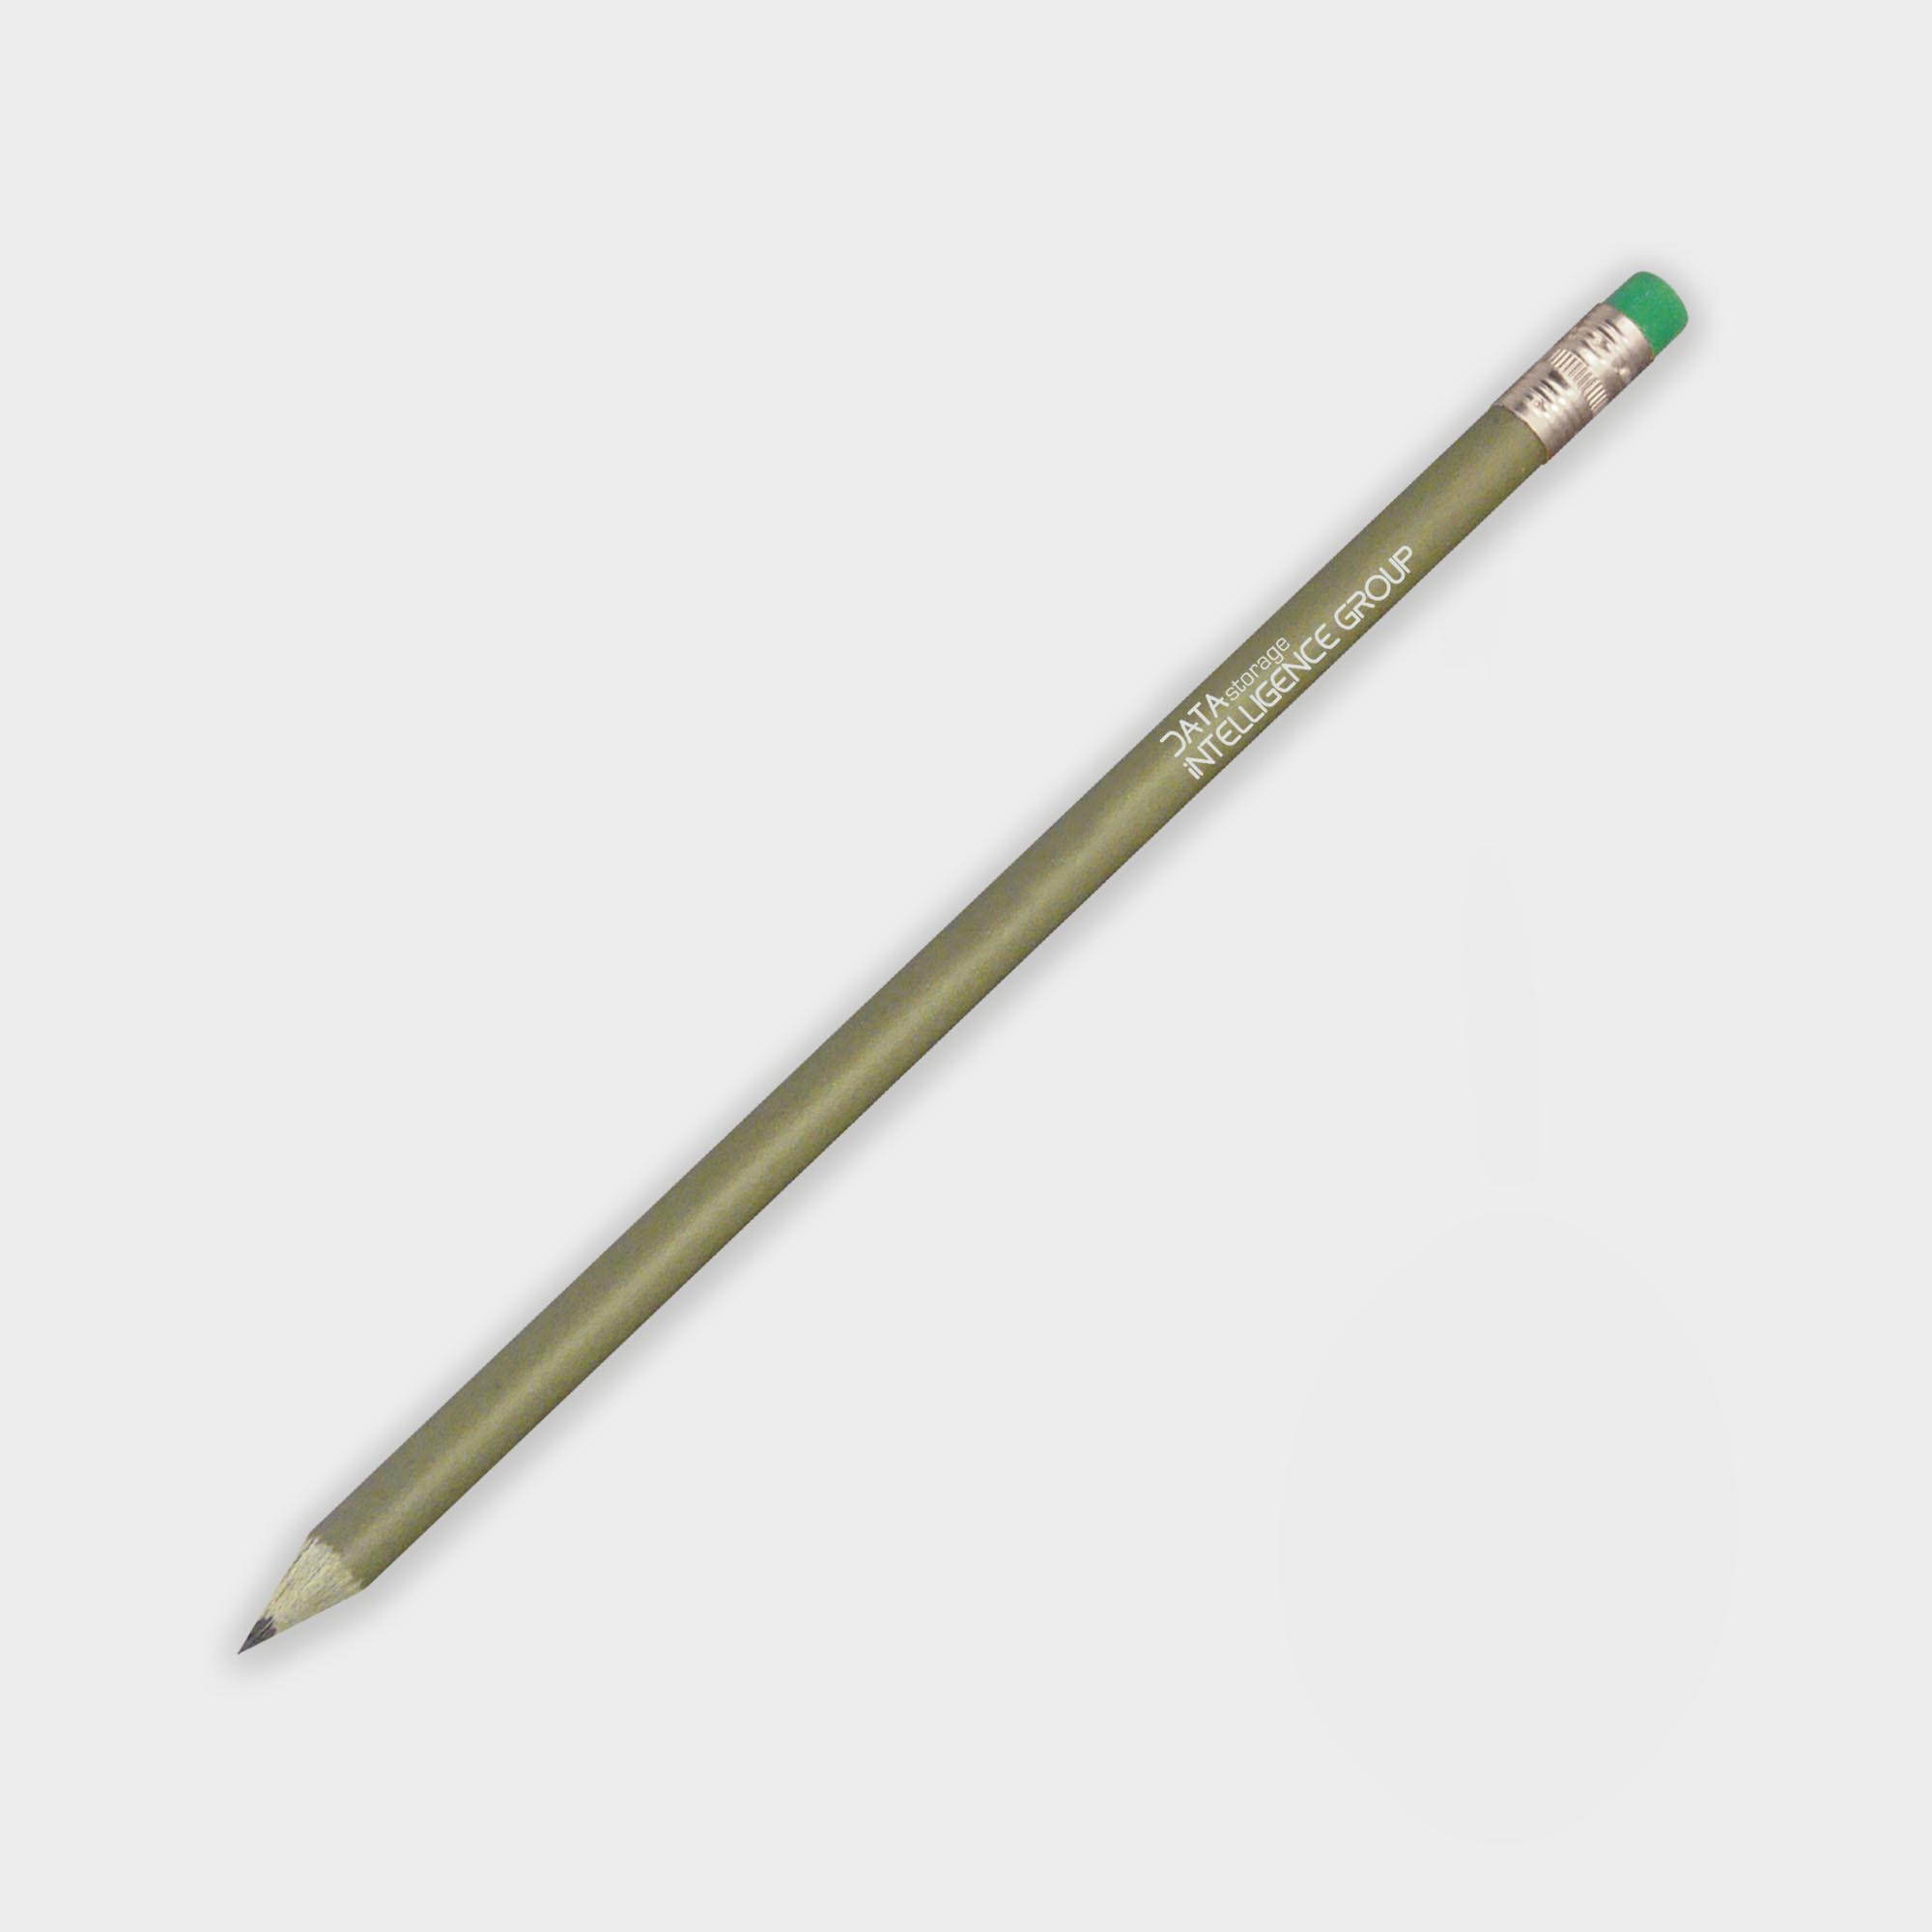 Promotional Recycled Money Pencil